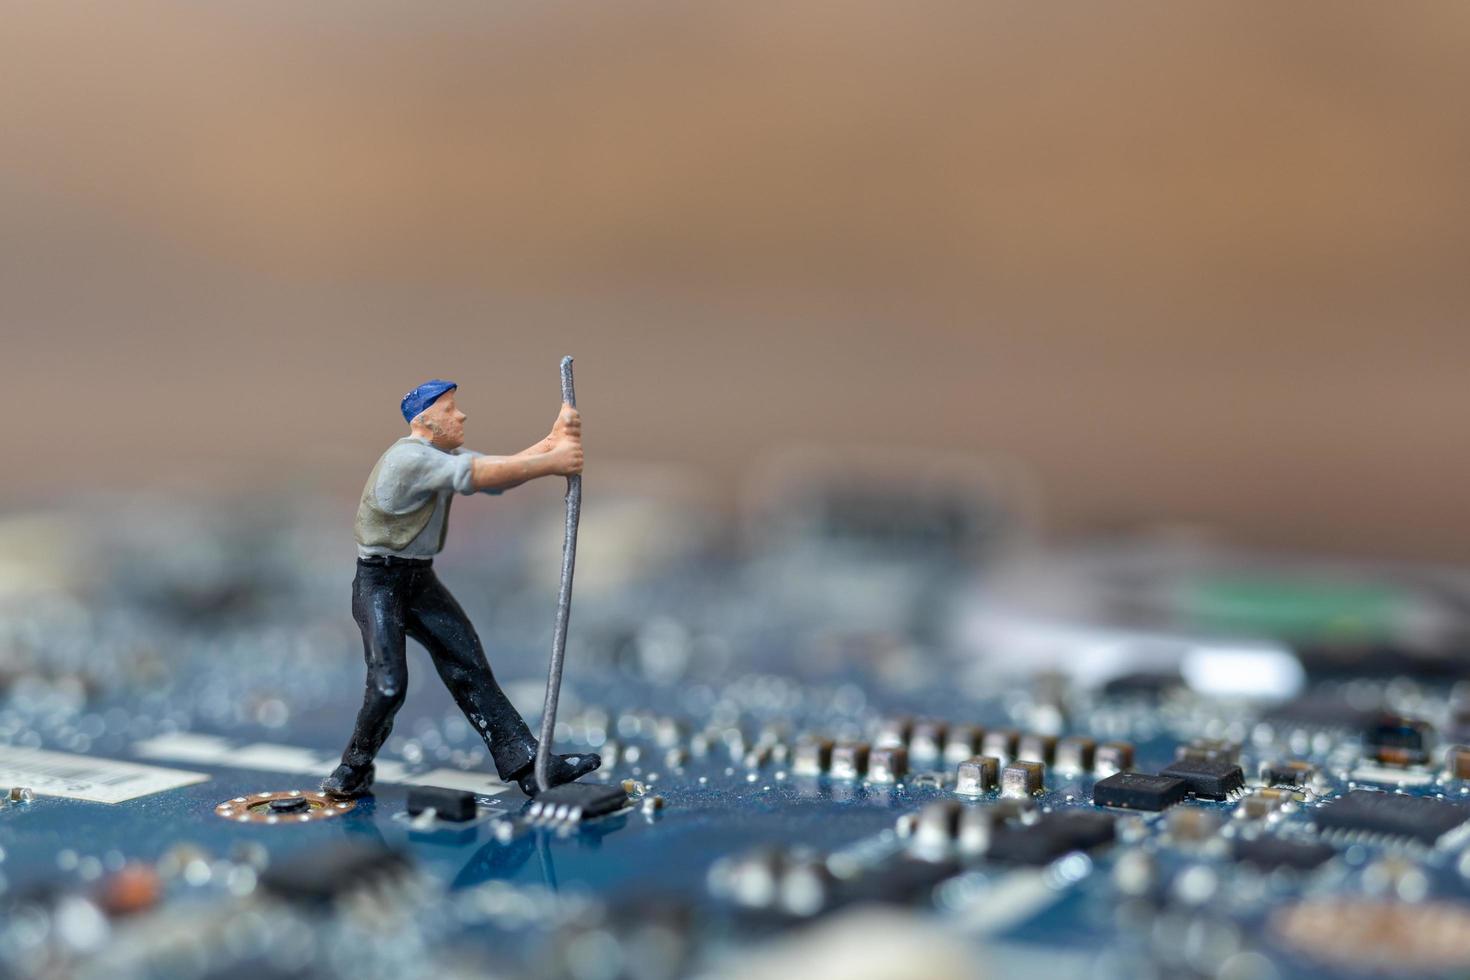 Miniature person working on a CPU board, technology concept photo